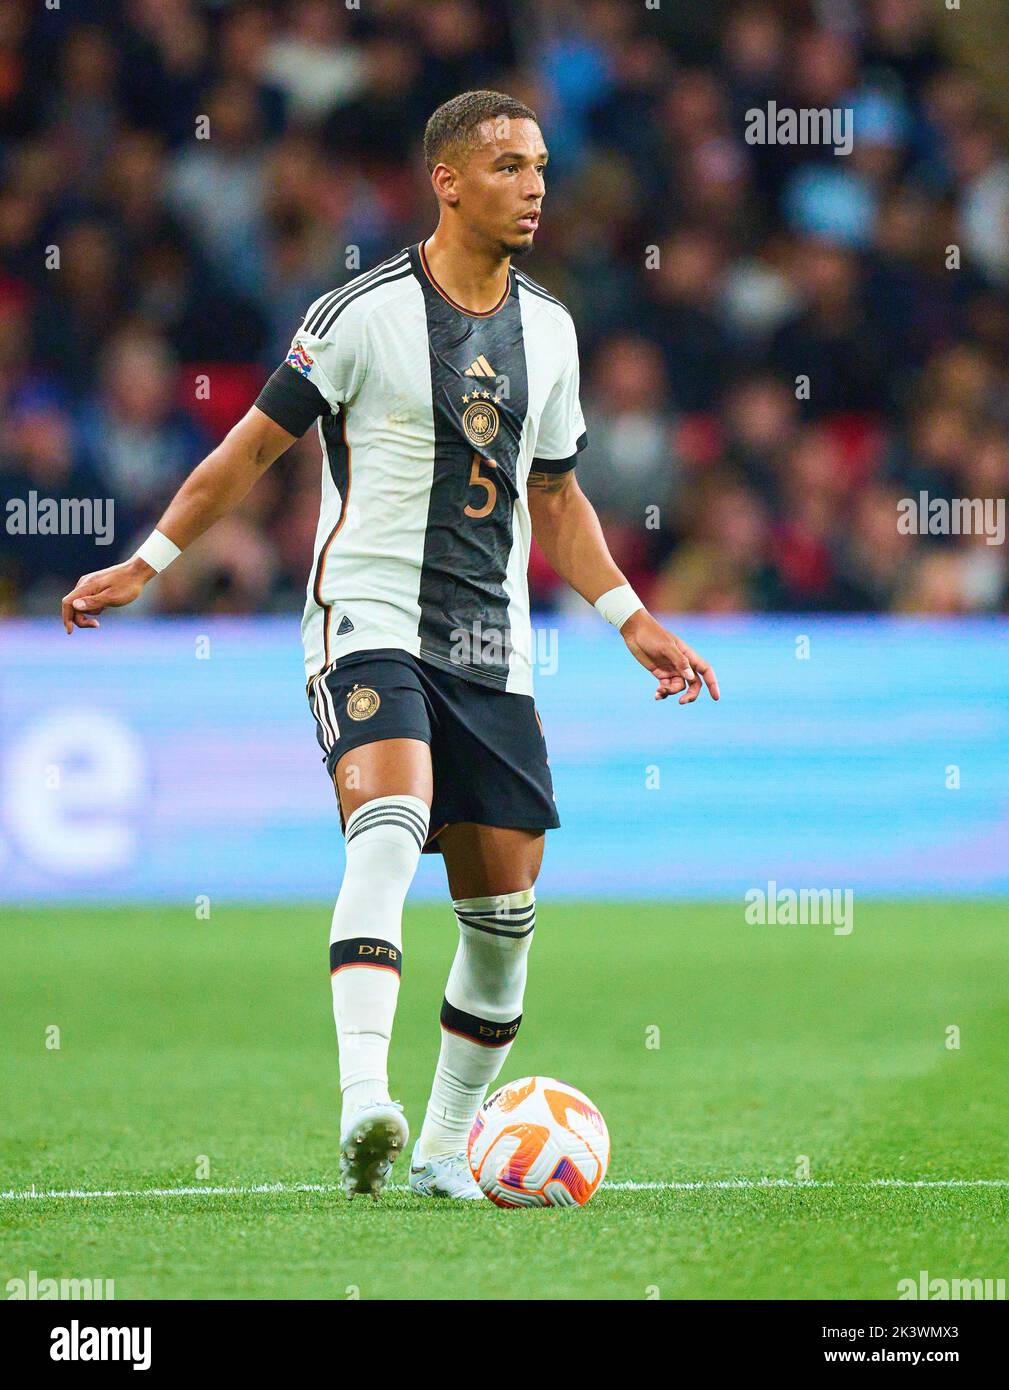 Thilo Kehrer, DFB 5  in the UEFA Nations League 2022 match  ENGLAND - GERMANY 3-3  in Season 2022/2023 on Sept 26, 2022  in London, Great Britain.  © Peter Schatz / Alamy Live News Stock Photo